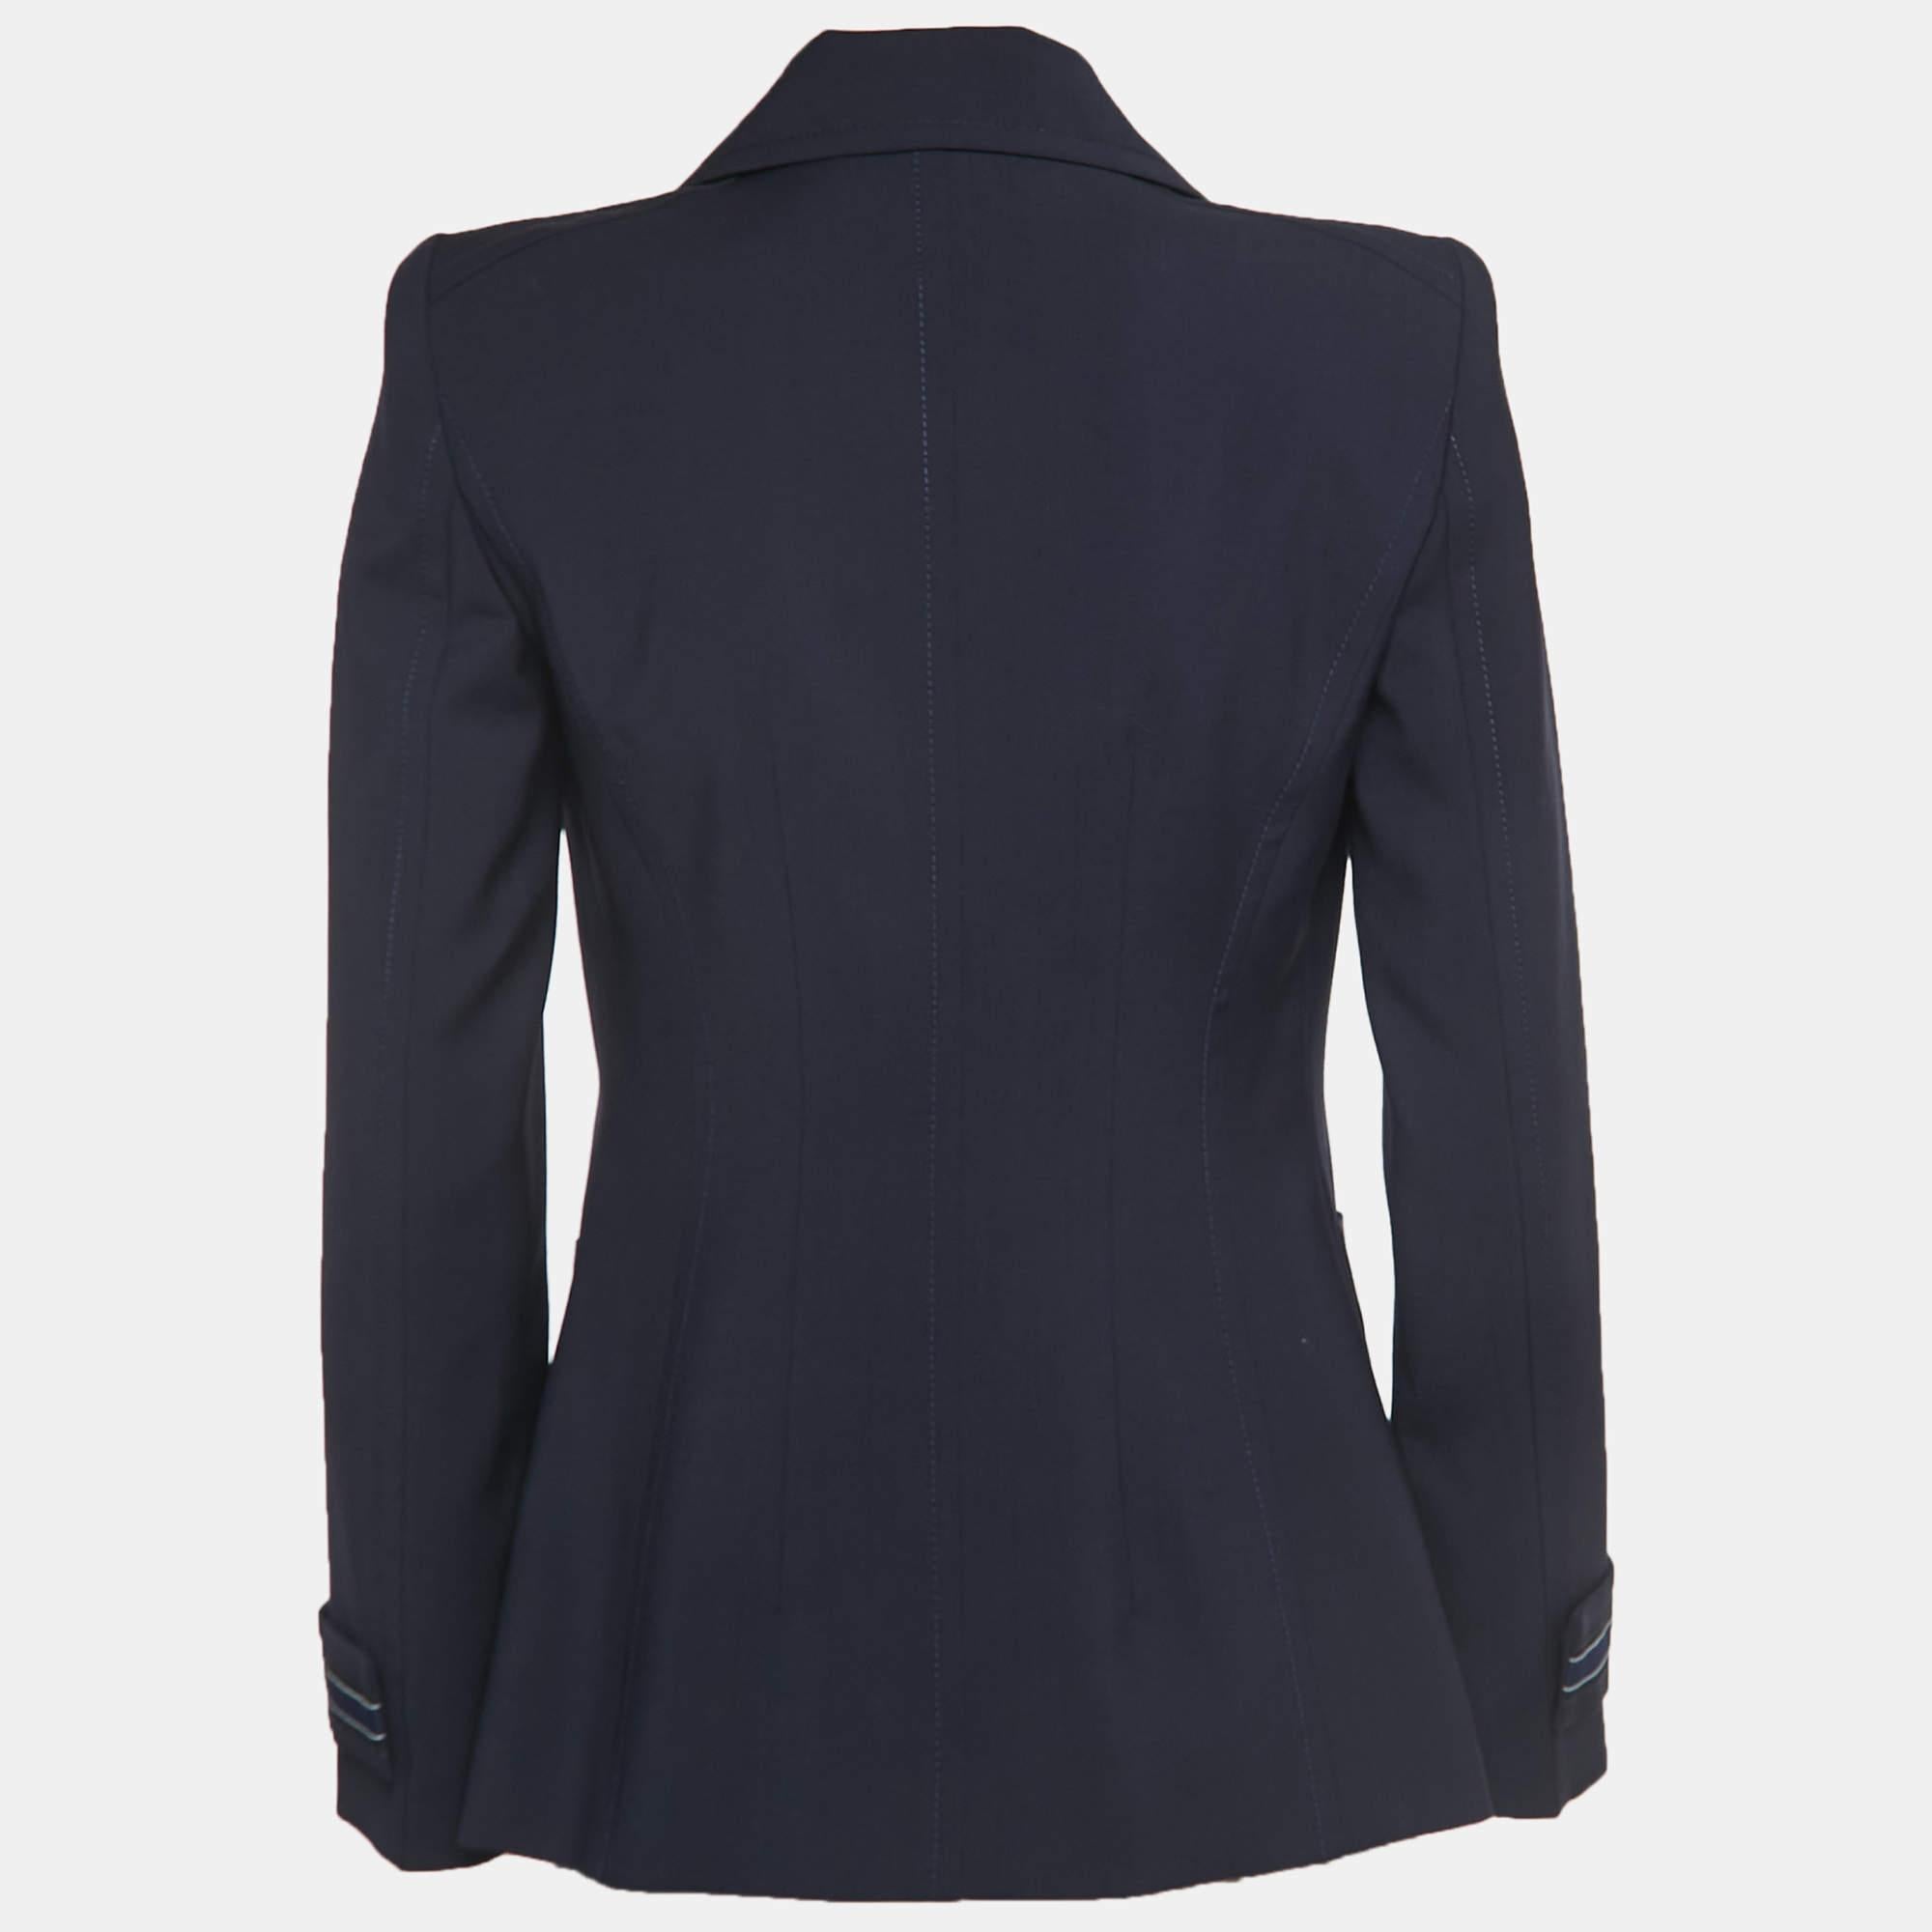 The navy blue shade and the smart shape make this Fendi wool blazer for women a covetable piece. It has long sleeves and a single-breasted front closure. Wear this one for an effortlessly chic look.

